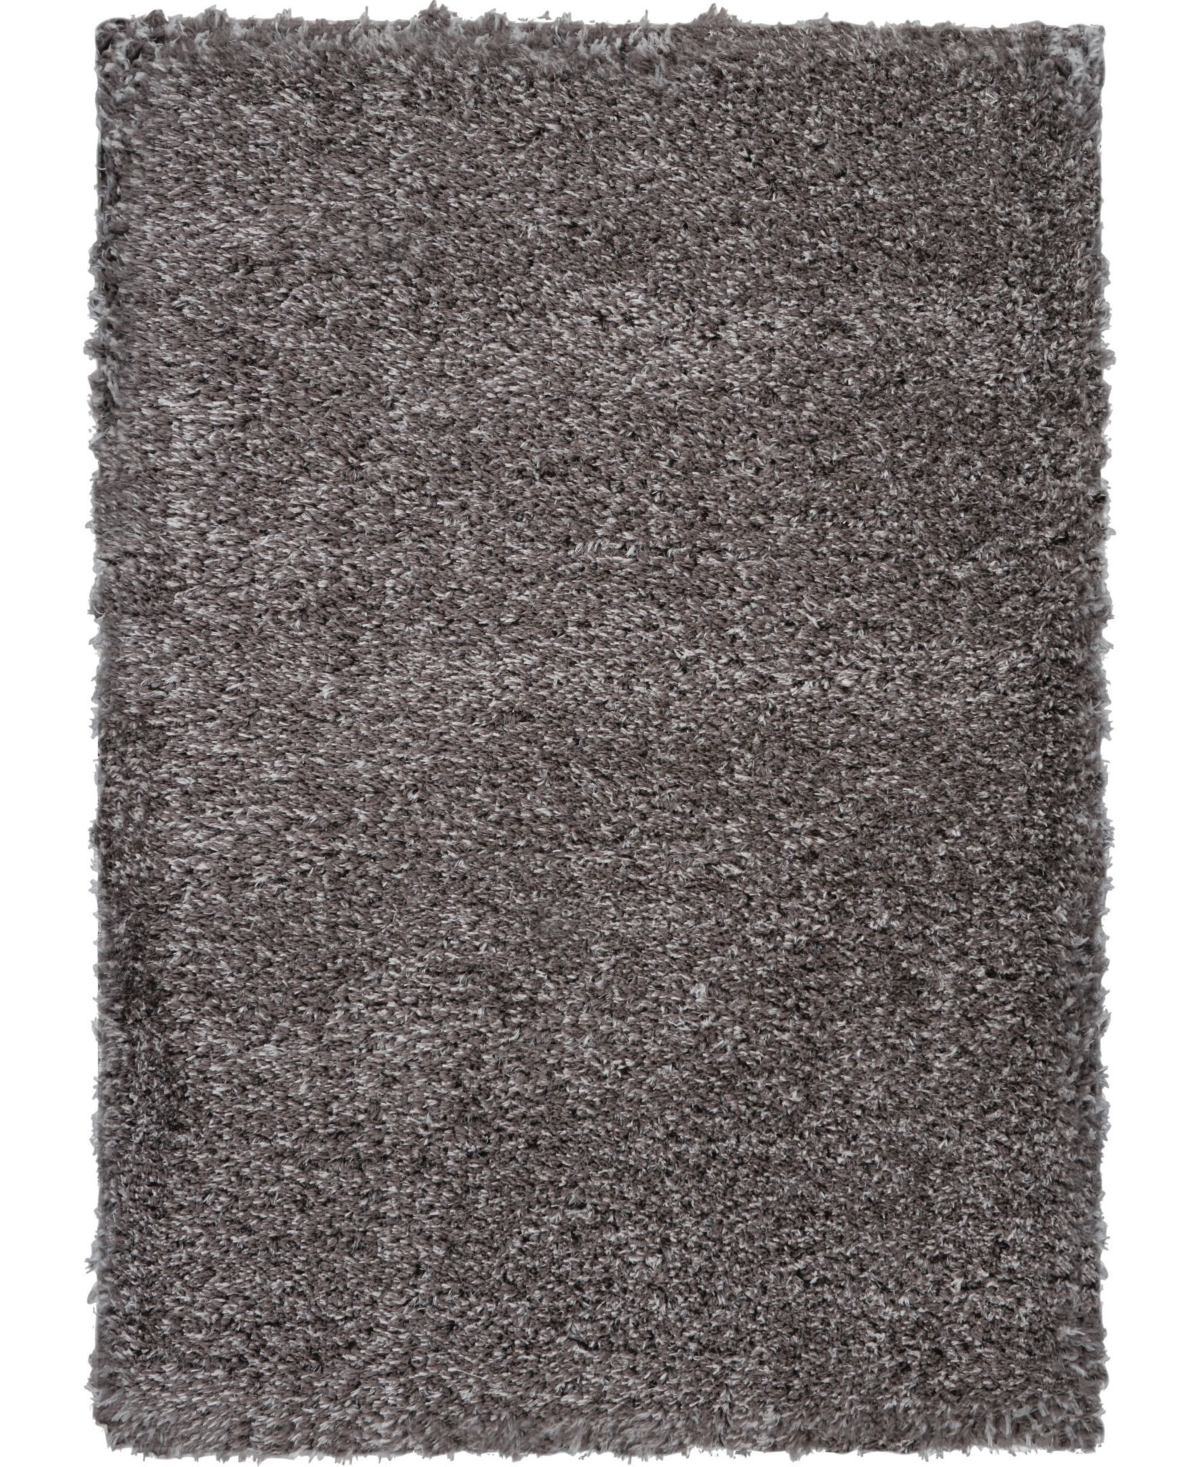 NOURISON LUXE SHAG LXS01 CHARCOAL 4' X 6' AREA RUG